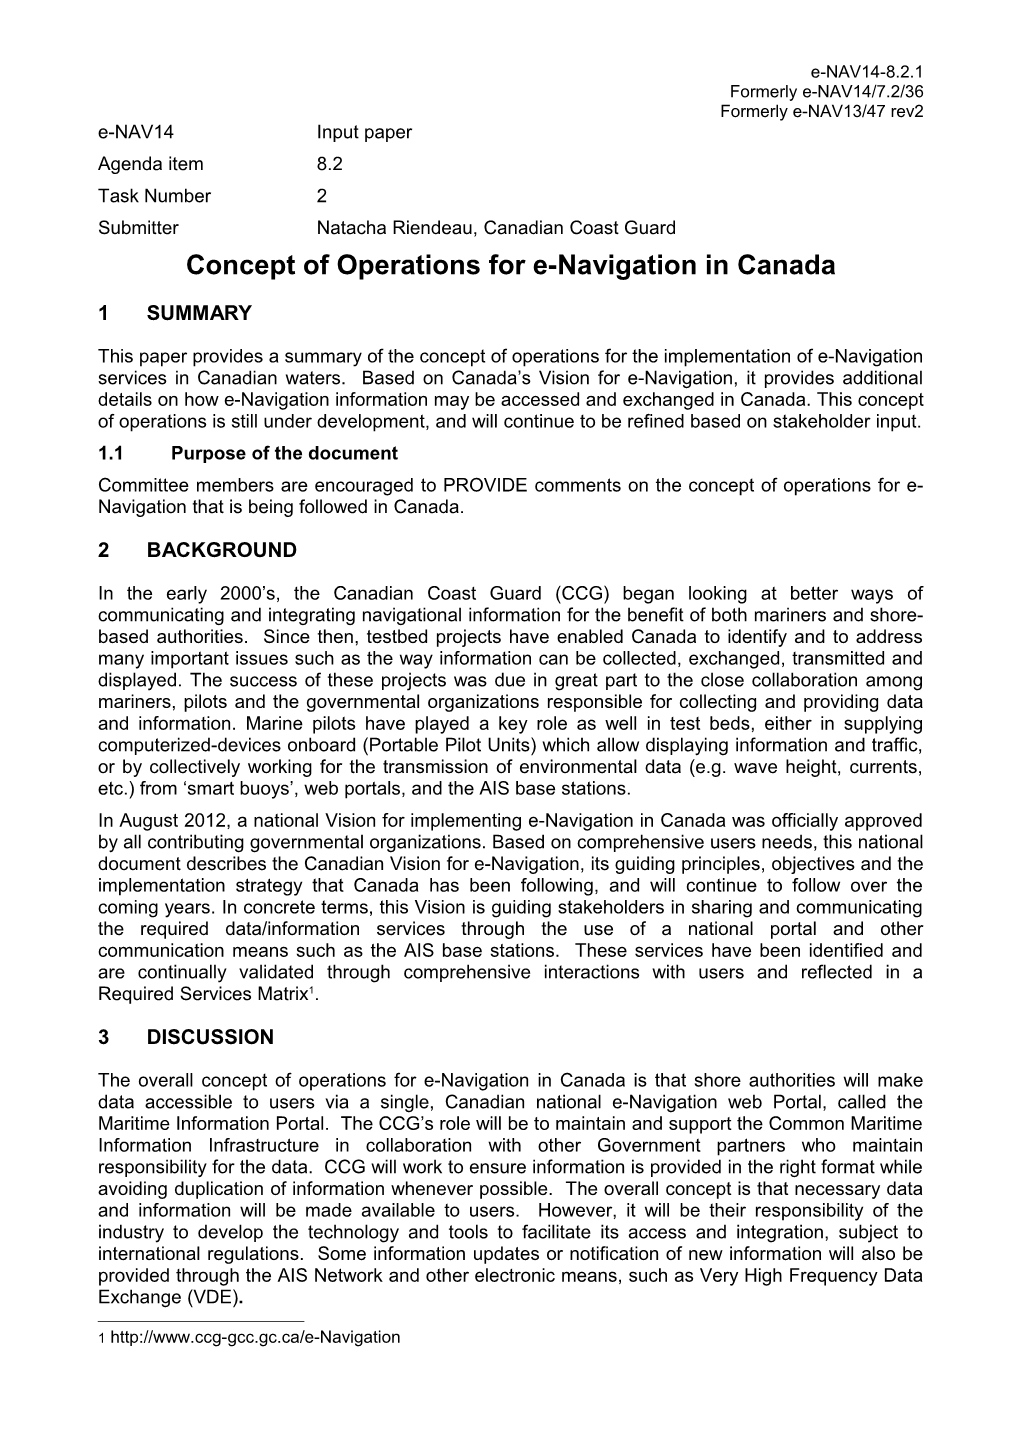 Concept of Operations for E-Navigation in Canada